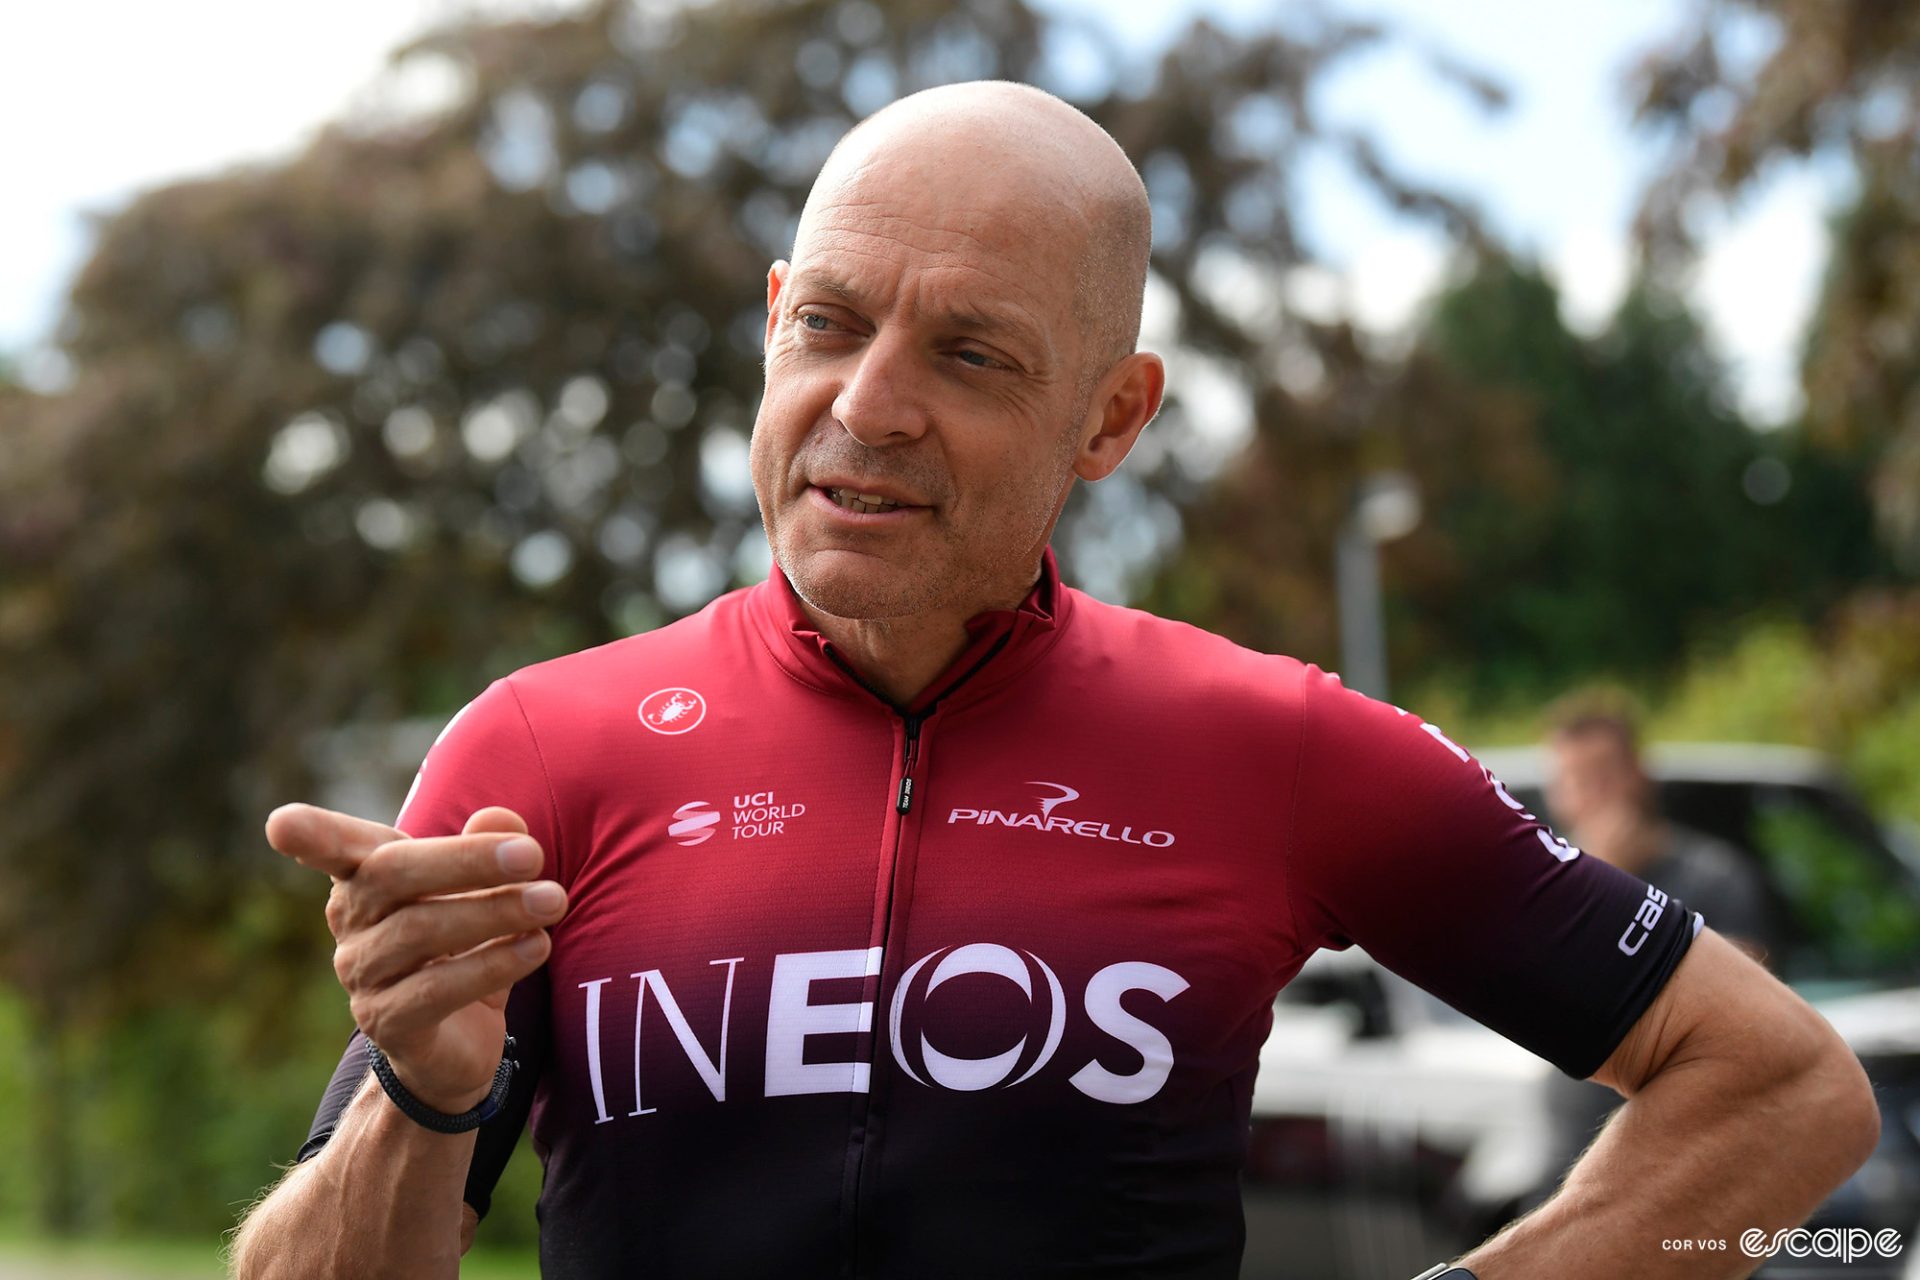 Ineos Grenadiers' Director of Sport, Dave Brailsford, is dressed in a red and black fade Ineos cycling kit. He's pointing to something off-camera and has an especially smarmy look on his face.